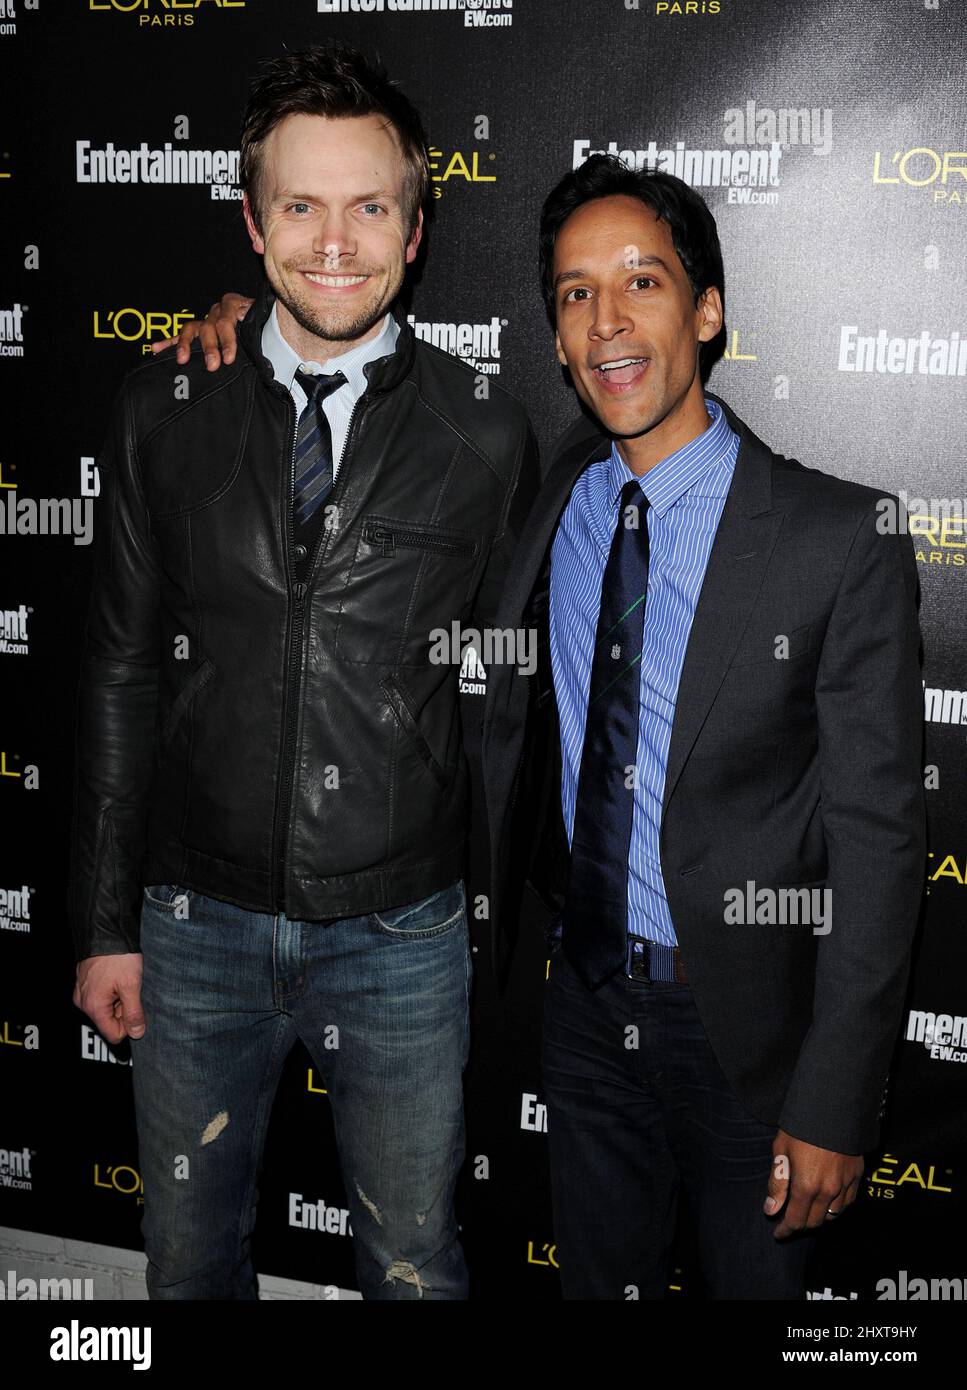 Joel McHale und Danny Pudi kommen bei der EW's Pre Screen Actors Guild Awards Party 2011 im Chateau Marmont in West Hollywood an. Stockfoto